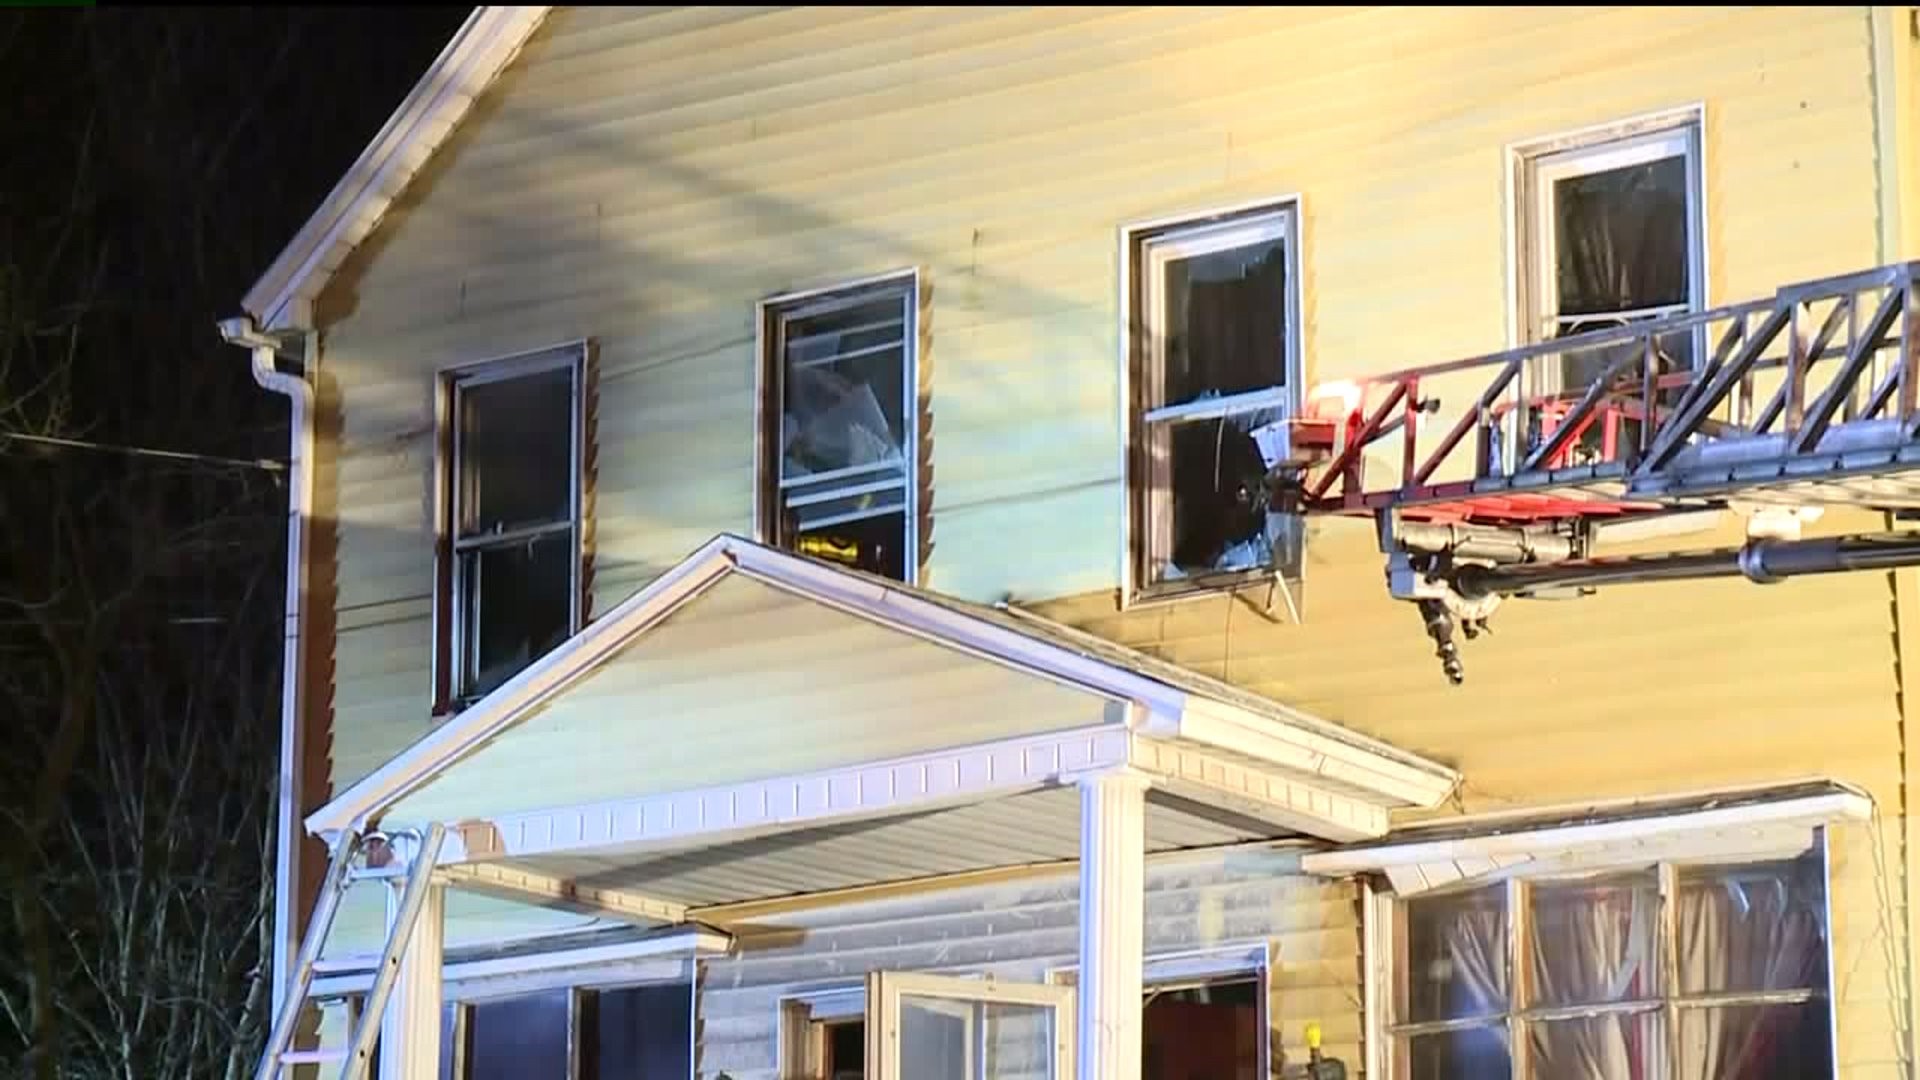 Fire Breaks Out at a Vacant Home in Scranton